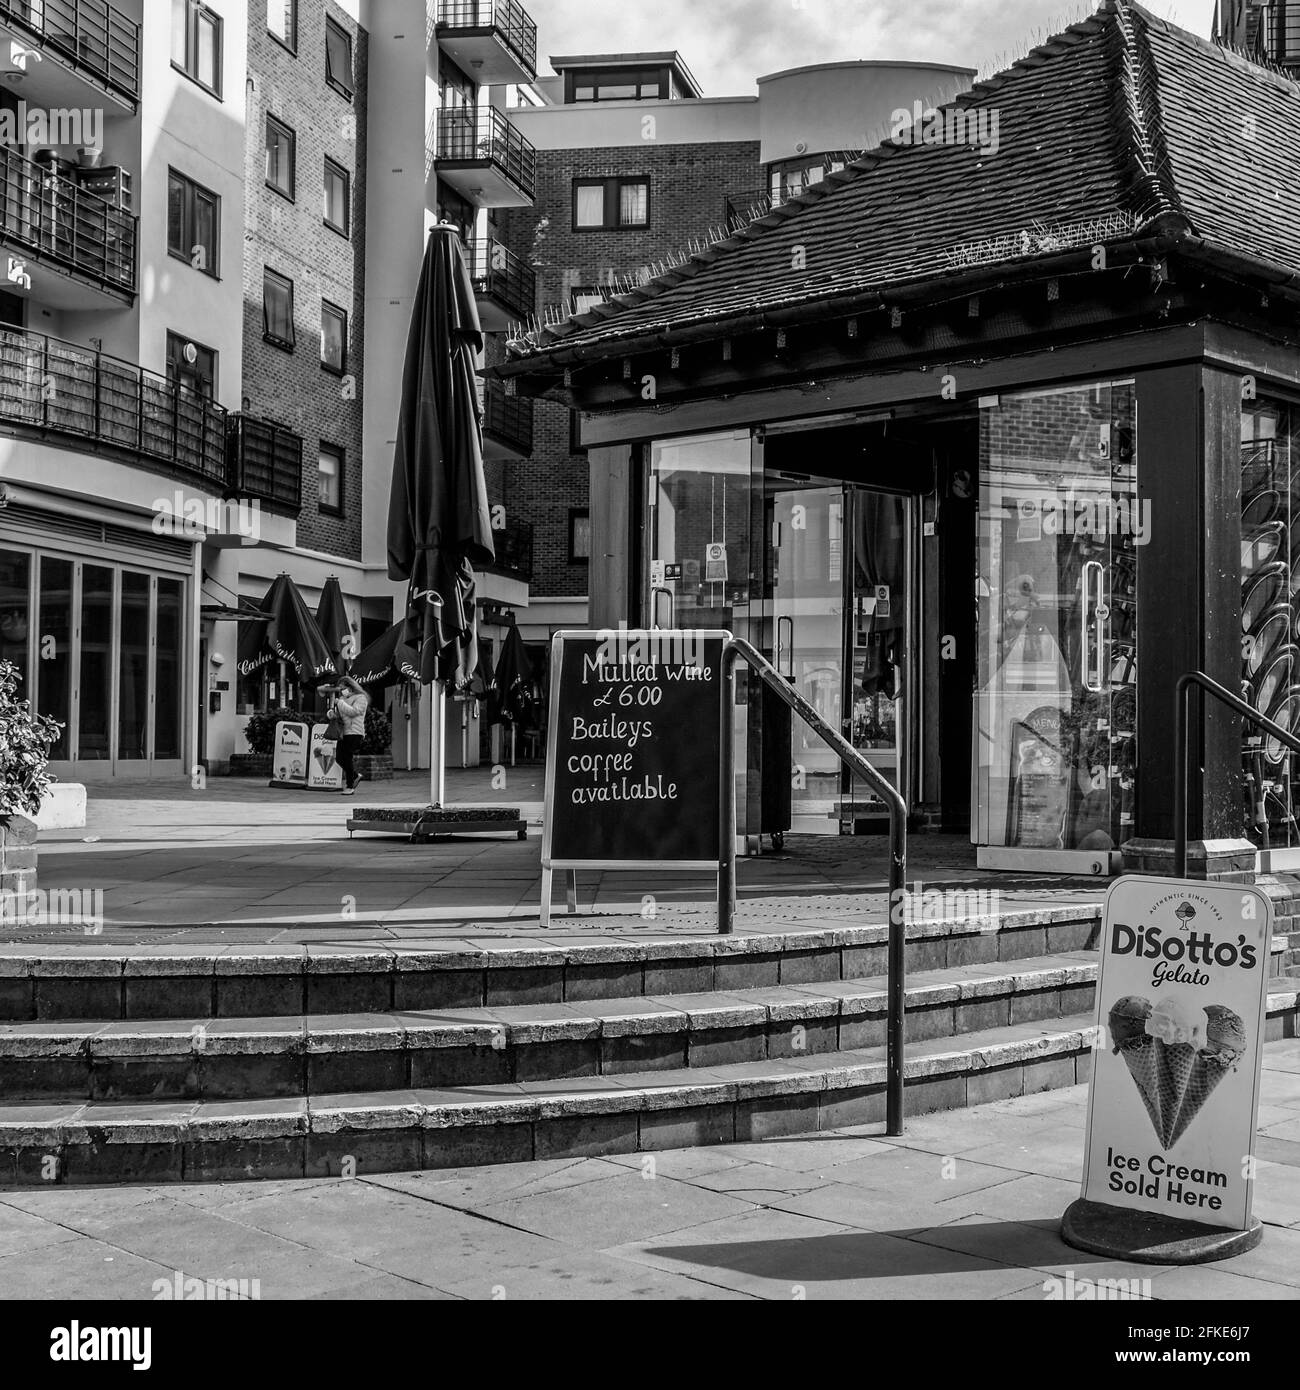 Kingston London UK, April 2021, Cafe Kiosk With No People In A Pedestrian Area With Luxury Apartments In The Background Stock Photo